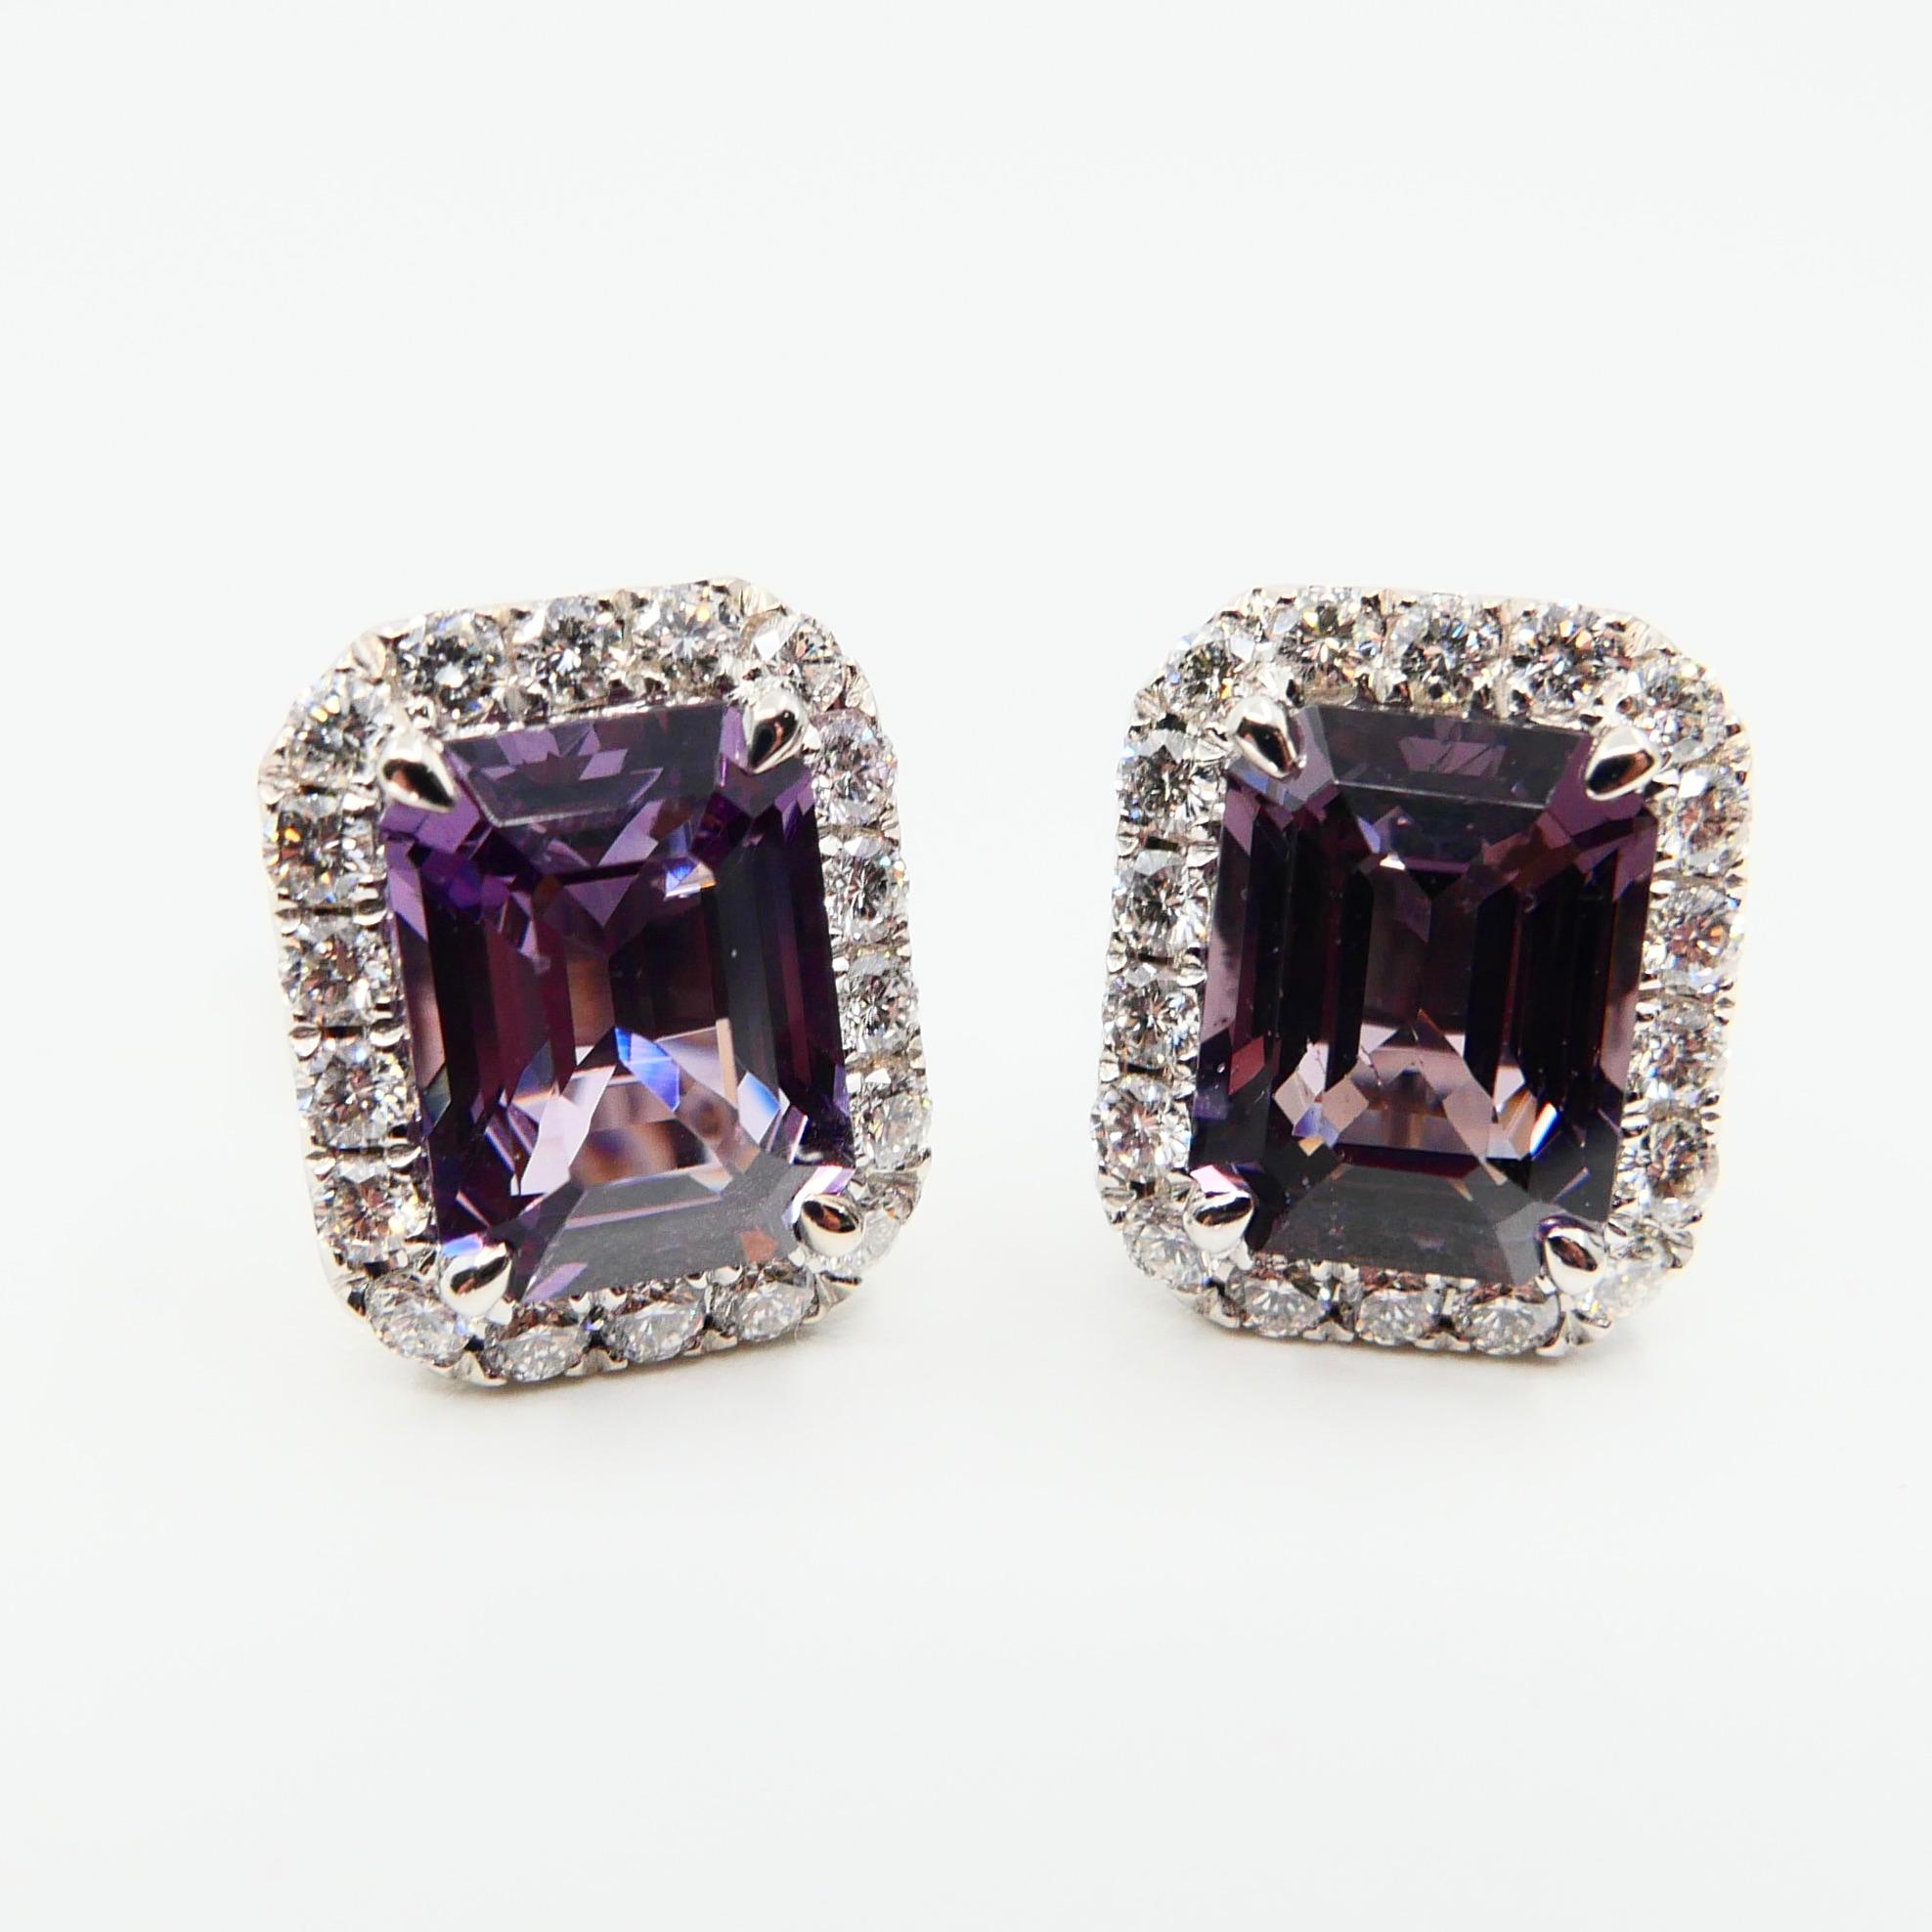 Natural 4.73 Carat Purple Step Cut Spinels and 0.67 Carat Diamond Earrings For Sale 5